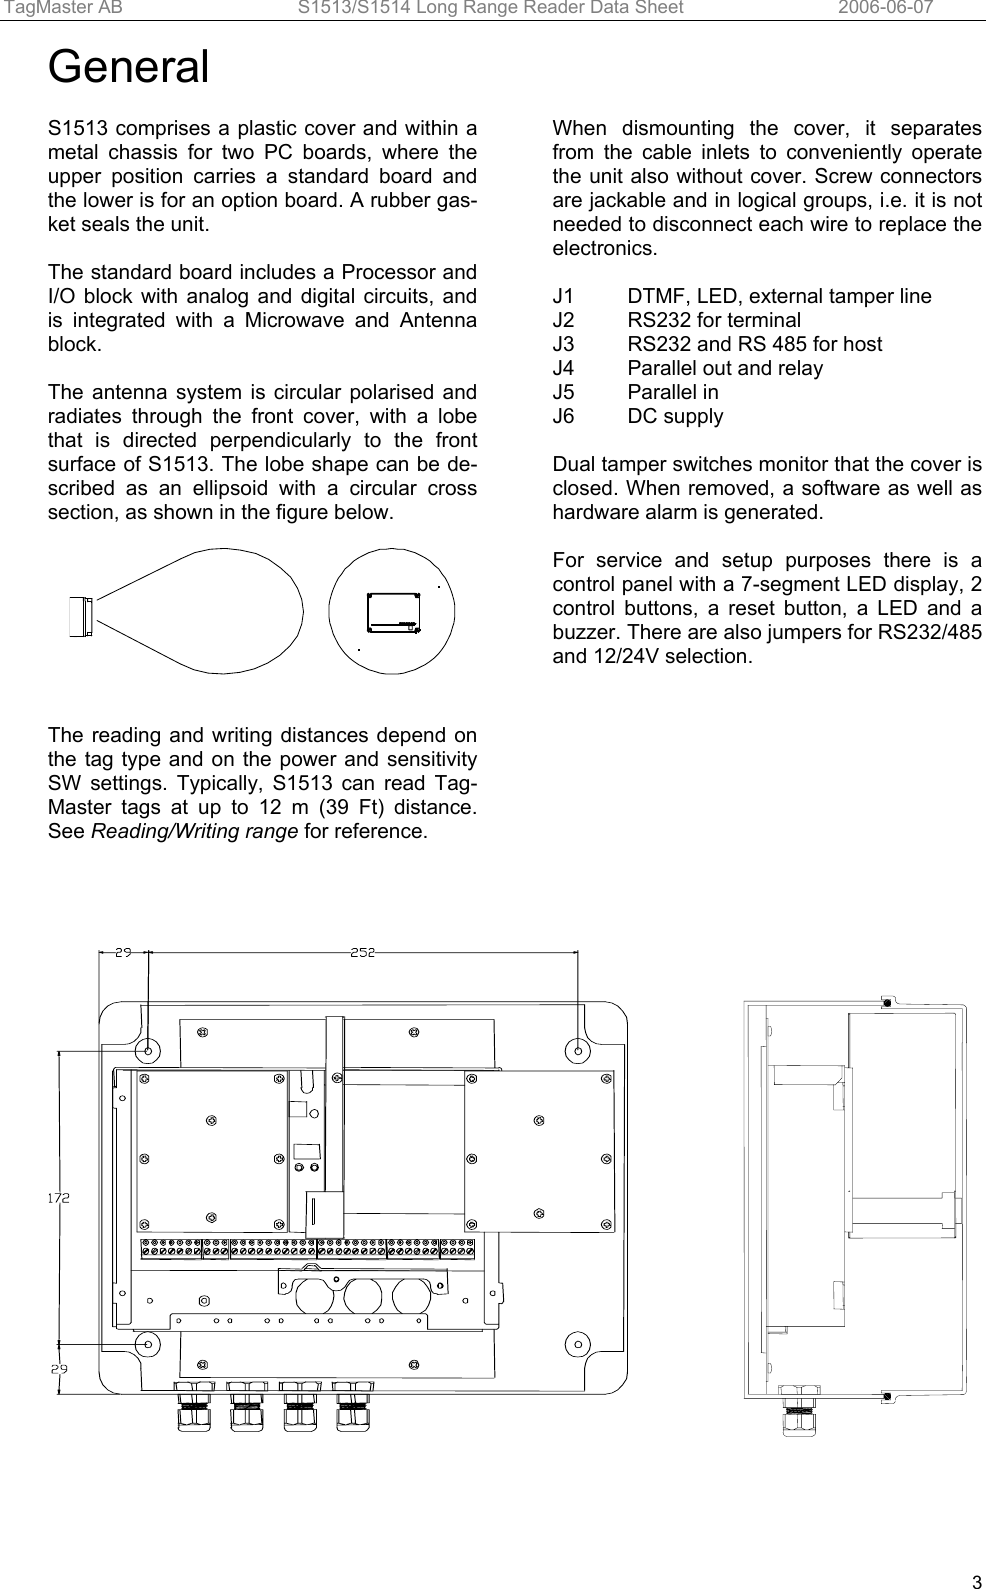 TagMaster AB  S1513/S1514 Long Range Reader Data Sheet   2006-06-07  3General  S1513 comprises a plastic cover and within a metal chassis for two PC boards, where the upper position carries a standard board and the lower is for an option board. A rubber gas-ket seals the unit.   The standard board includes a Processor and I/O block with analog and digital circuits, and is integrated with a Microwave and Antenna block.   The antenna system is circular polarised and radiates through the front cover, with a lobe that is directed perpendicularly to the front surface of S1513. The lobe shape can be de-scribed as an ellipsoid with a circular cross section, as shown in the figure below.     The reading and writing distances depend on the tag type and on the power and sensitivity SW settings. Typically, S1513 can read Tag-Master tags at up to 12 m (39 Ft) distance. See Reading/Writing range for reference. When dismounting the cover, it separates from the cable inlets to conveniently operate the unit also without cover. Screw connectors are jackable and in logical groups, i.e. it is not needed to disconnect each wire to replace the electronics.   J1   DTMF, LED, external tamper line J2   RS232 for terminal J3  RS232 and RS 485 for host J4   Parallel out and relay J5 Parallel in J6  DC supply   Dual tamper switches monitor that the cover is closed. When removed, a software as well as hardware alarm is generated.  For service and setup purposes there is a control panel with a 7-segment LED display, 2 control buttons, a reset button, a LED and a buzzer. There are also jumpers for RS232/485 and 12/24V selection.     